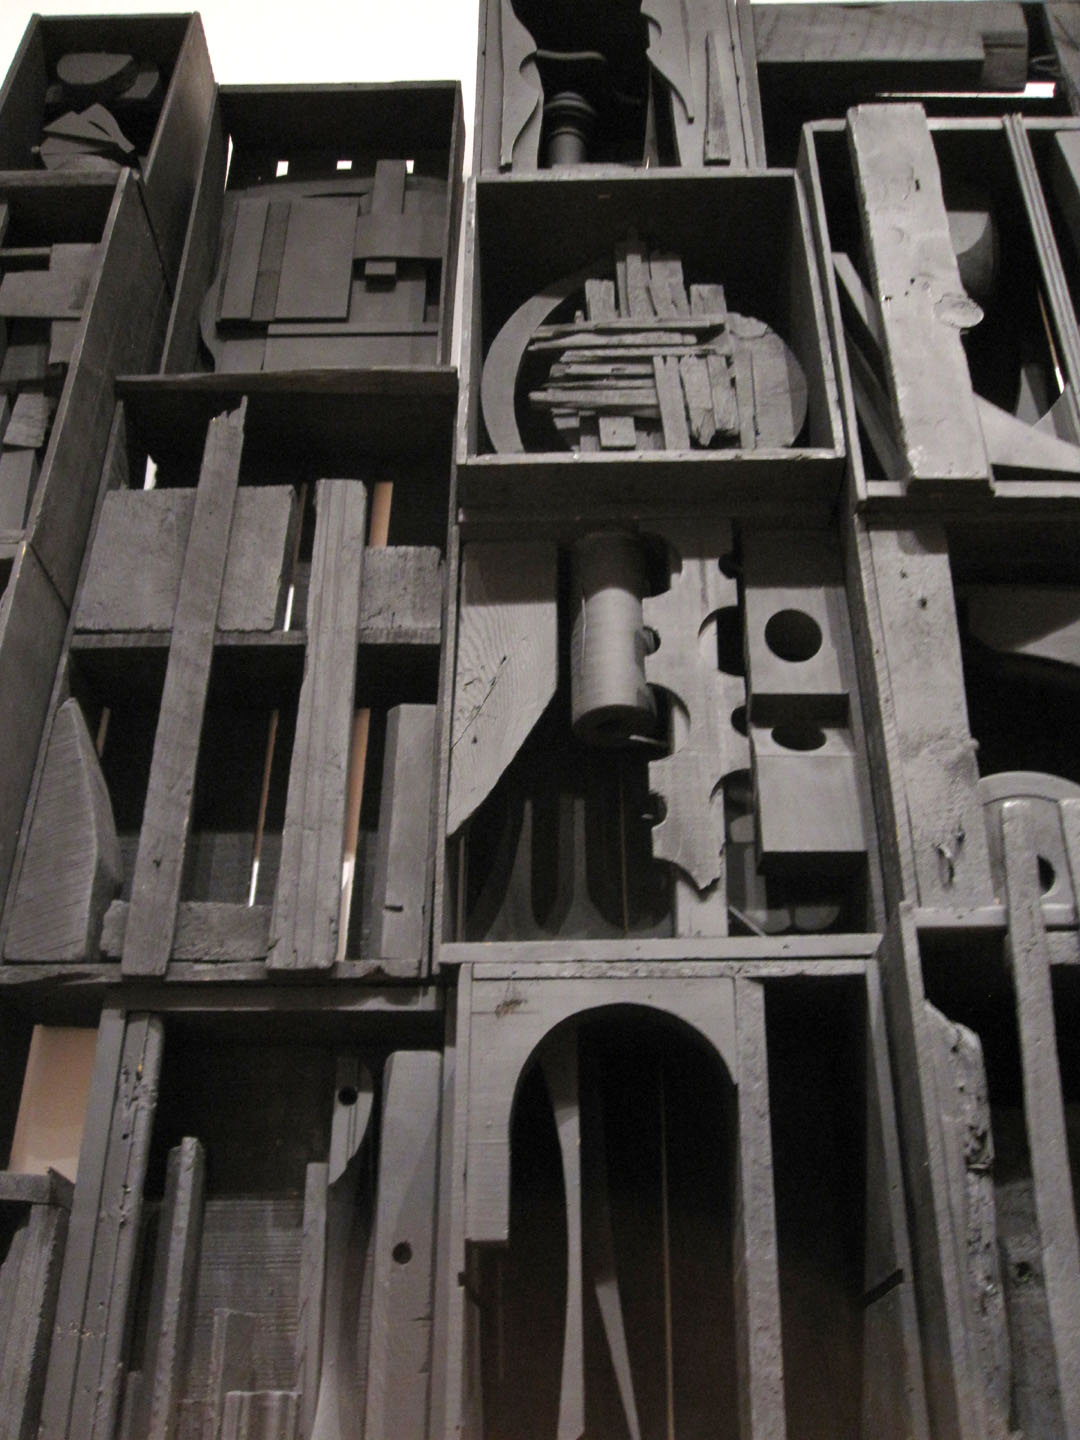 Buy research papers online cheap louise nevelson - sky cathedral